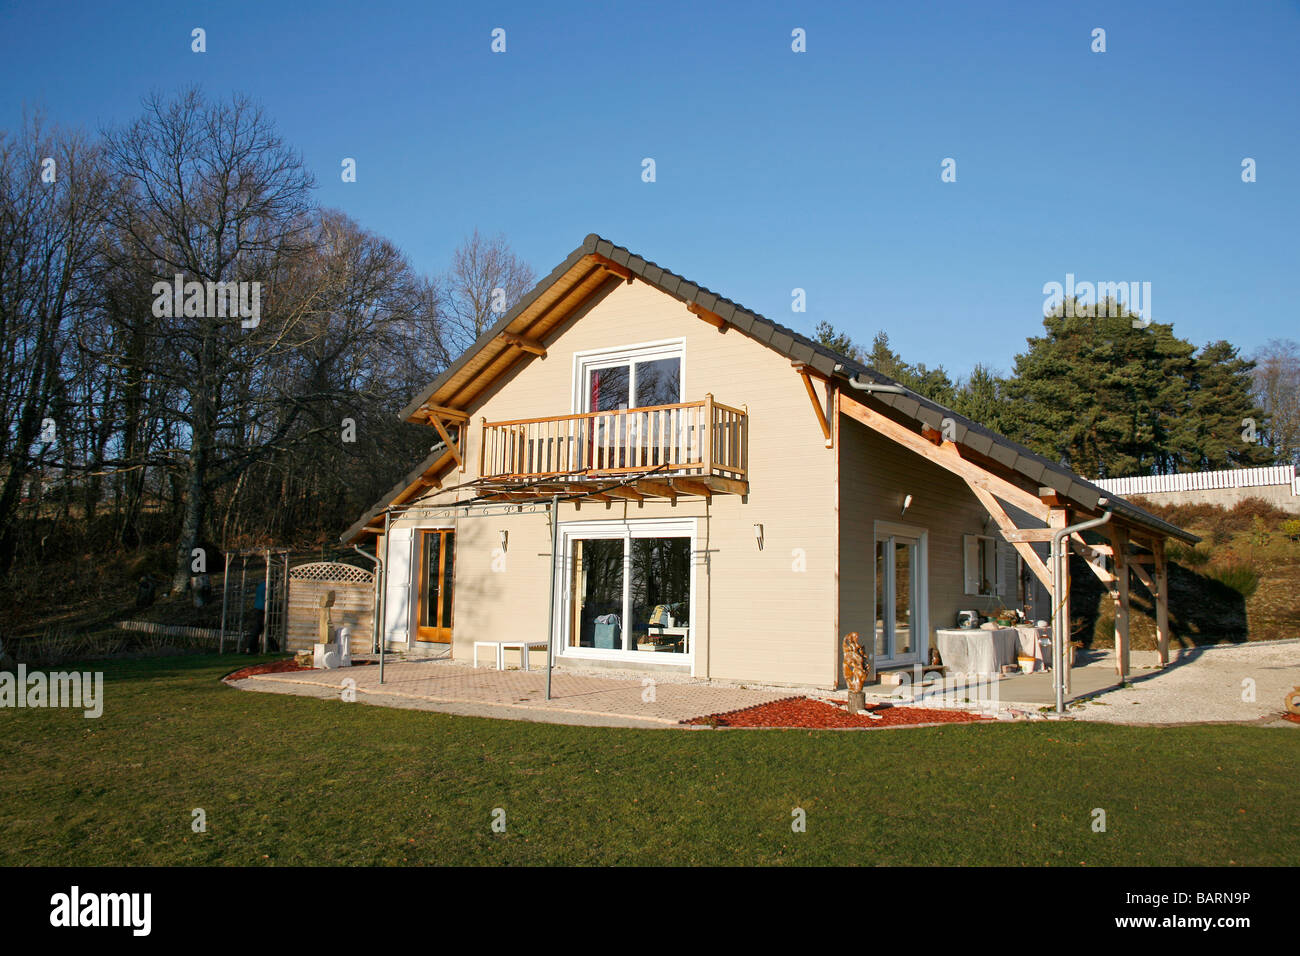 Correze France Newly built wooden house and garden Stock Photo